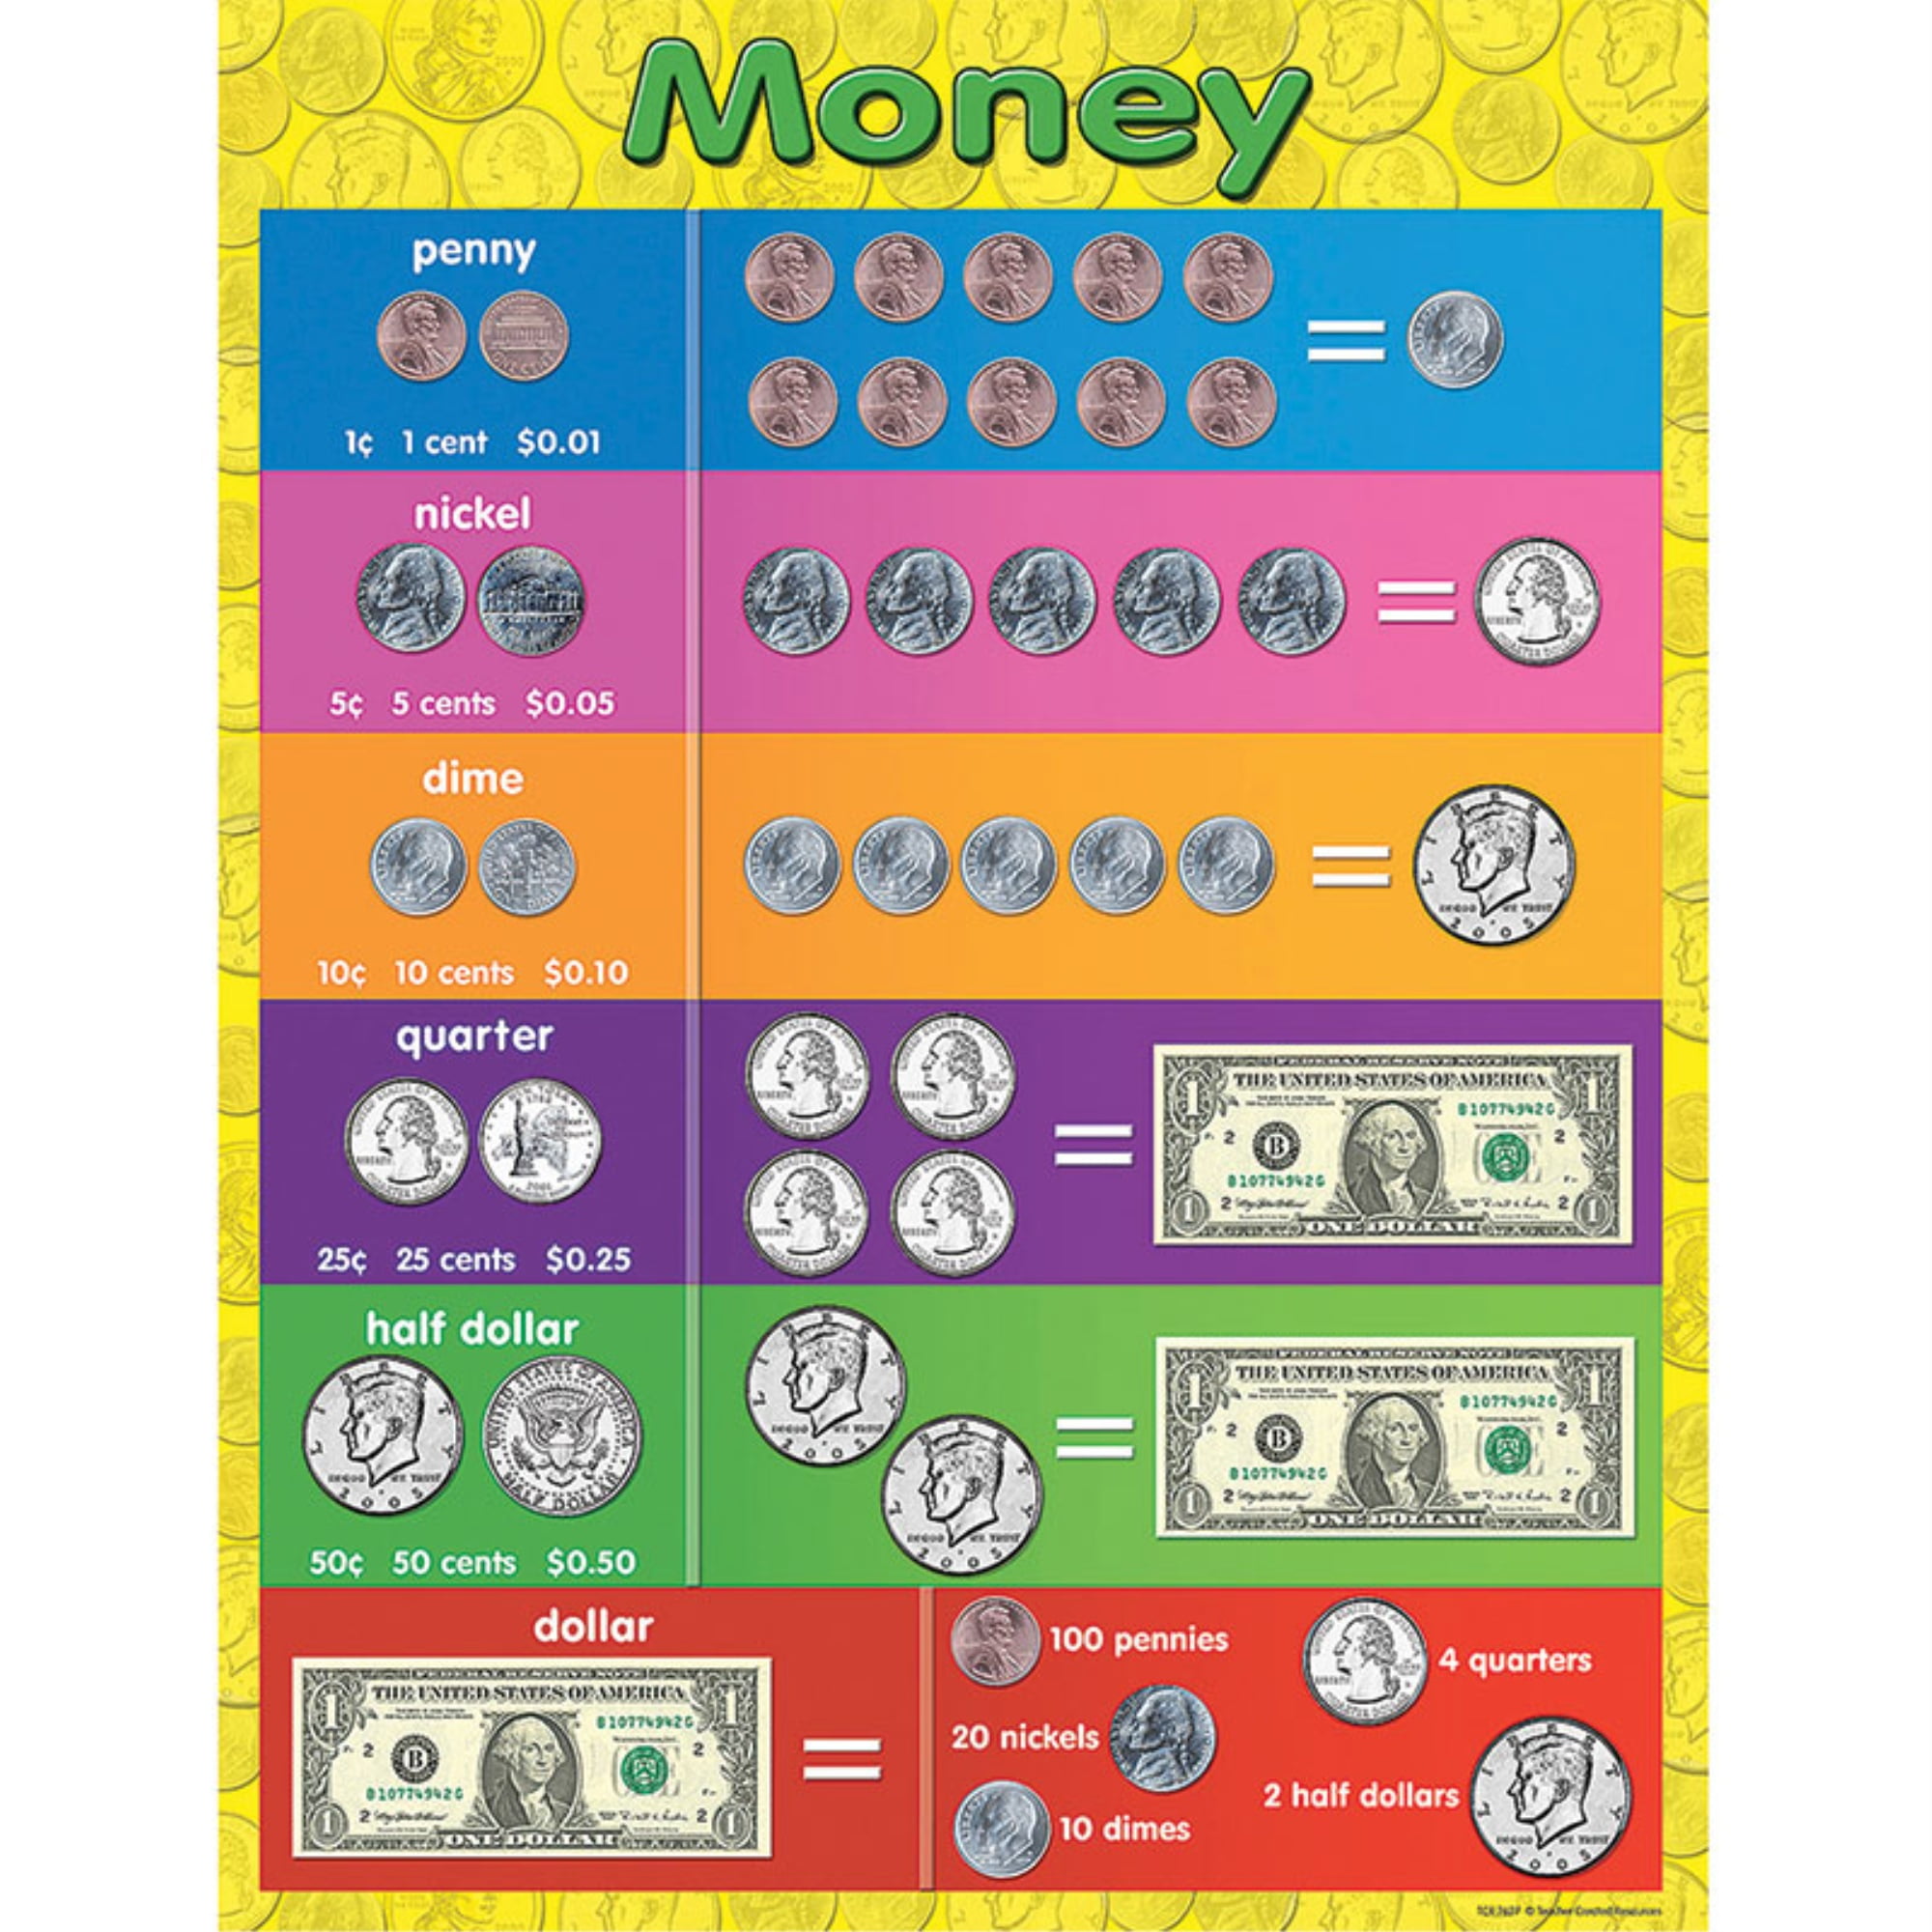 Months of the Year Owl-Stars!® Learning Chart Trend Enterprises Inc T-38448 